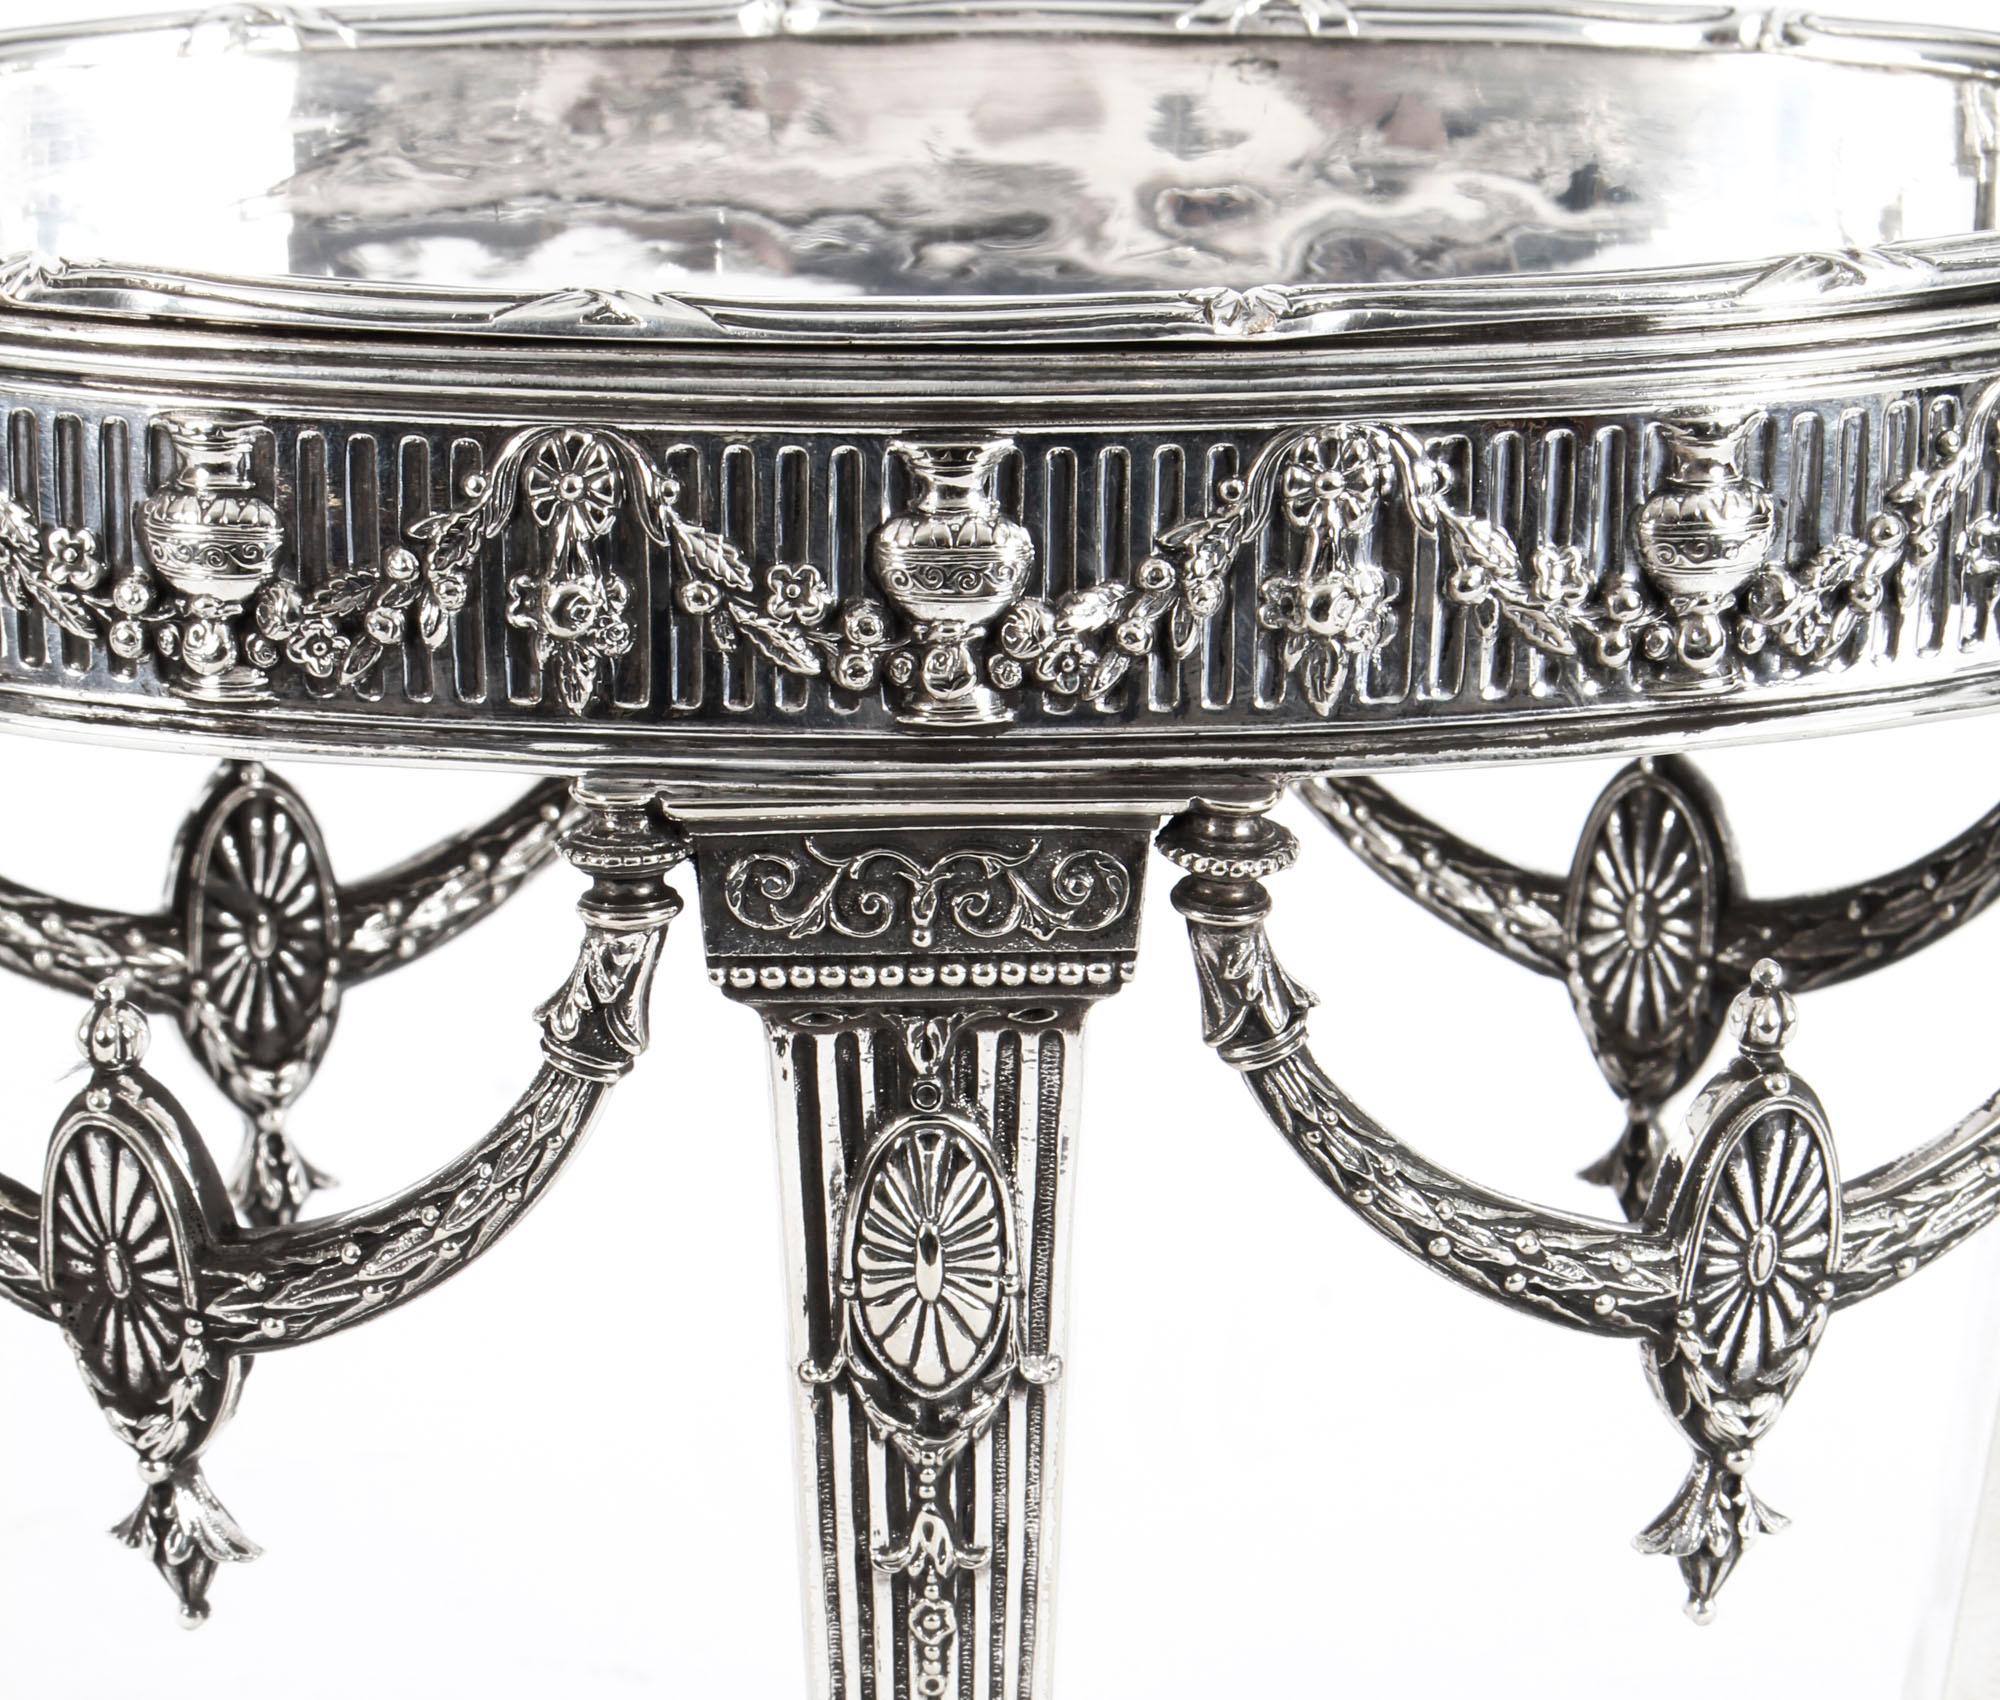 Late 19th Century Antique Victorian Silver Plate Centrepiece by Horace Woodward and Co., 1876